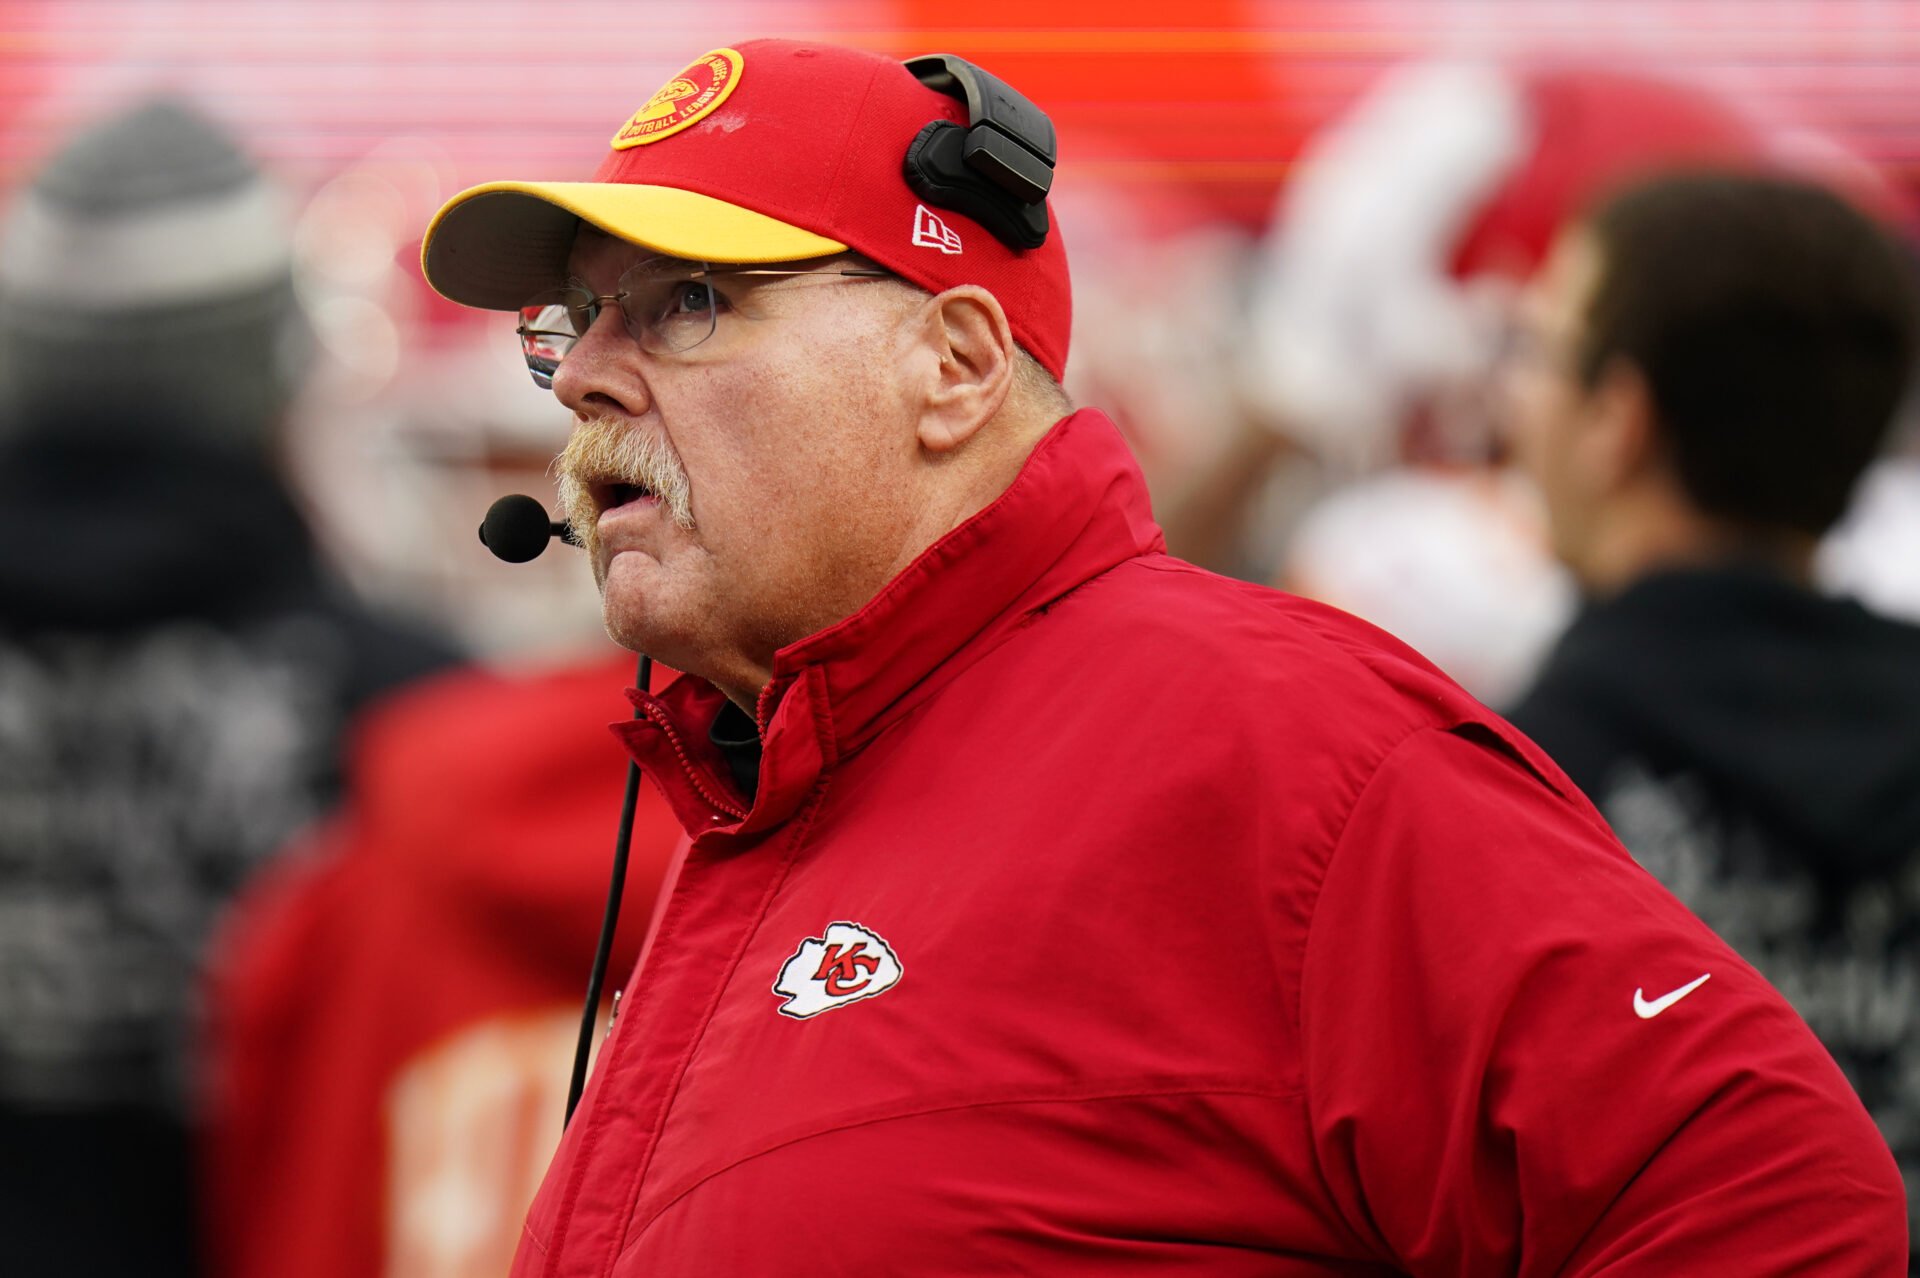 Kansas City Chiefs head coach Andy Reid on the sidelines during a game.